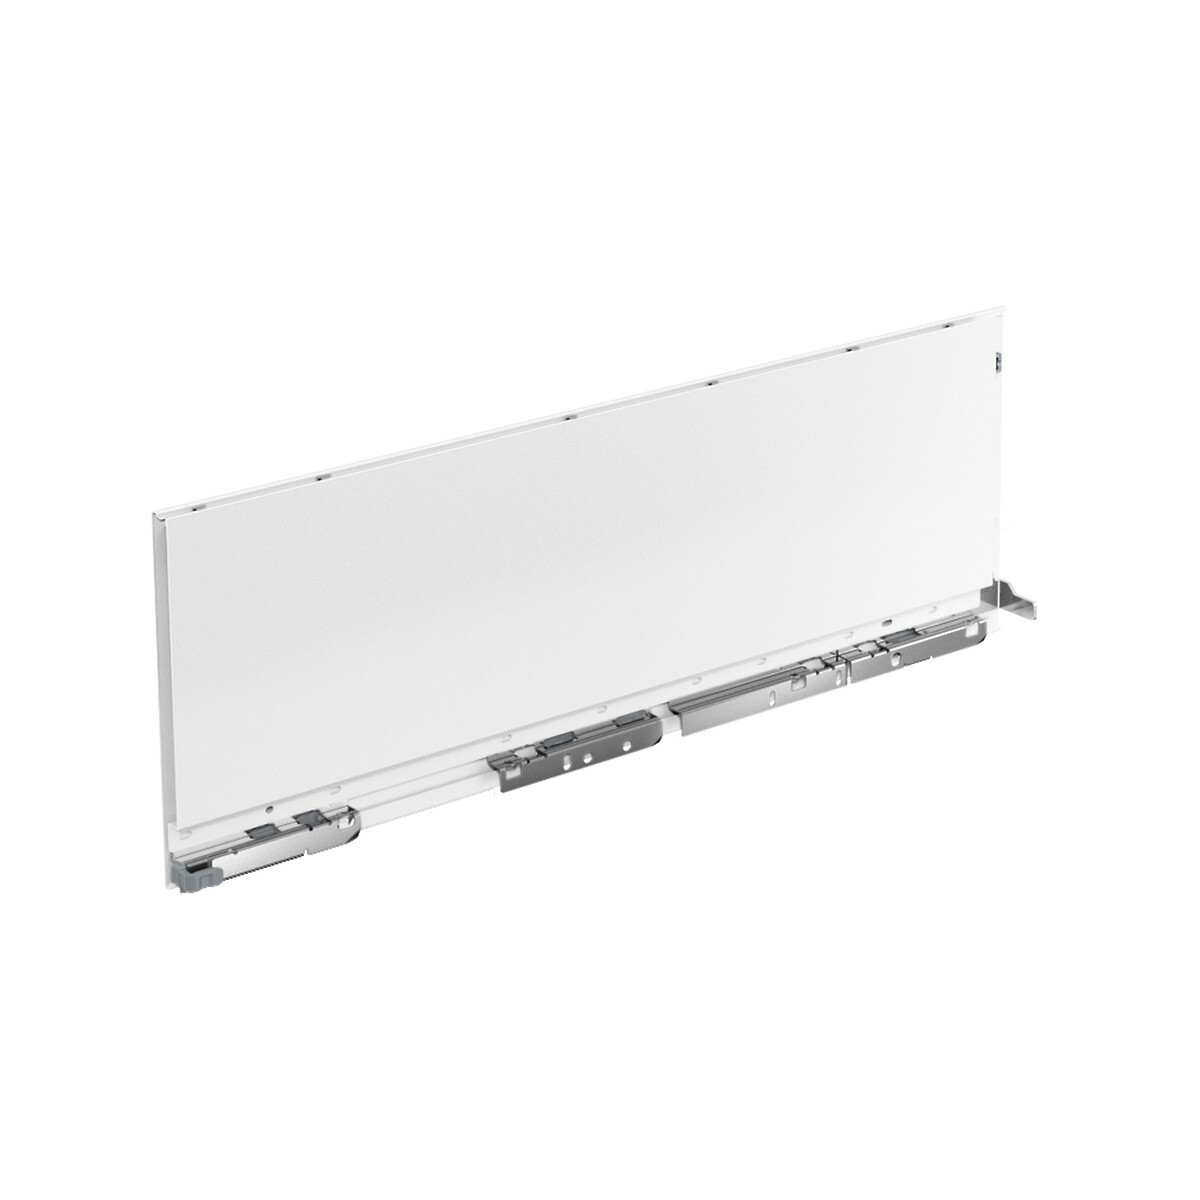 AvanTech YOU Drawer side profile, height 187 mm x NL 300 mm, White, Right